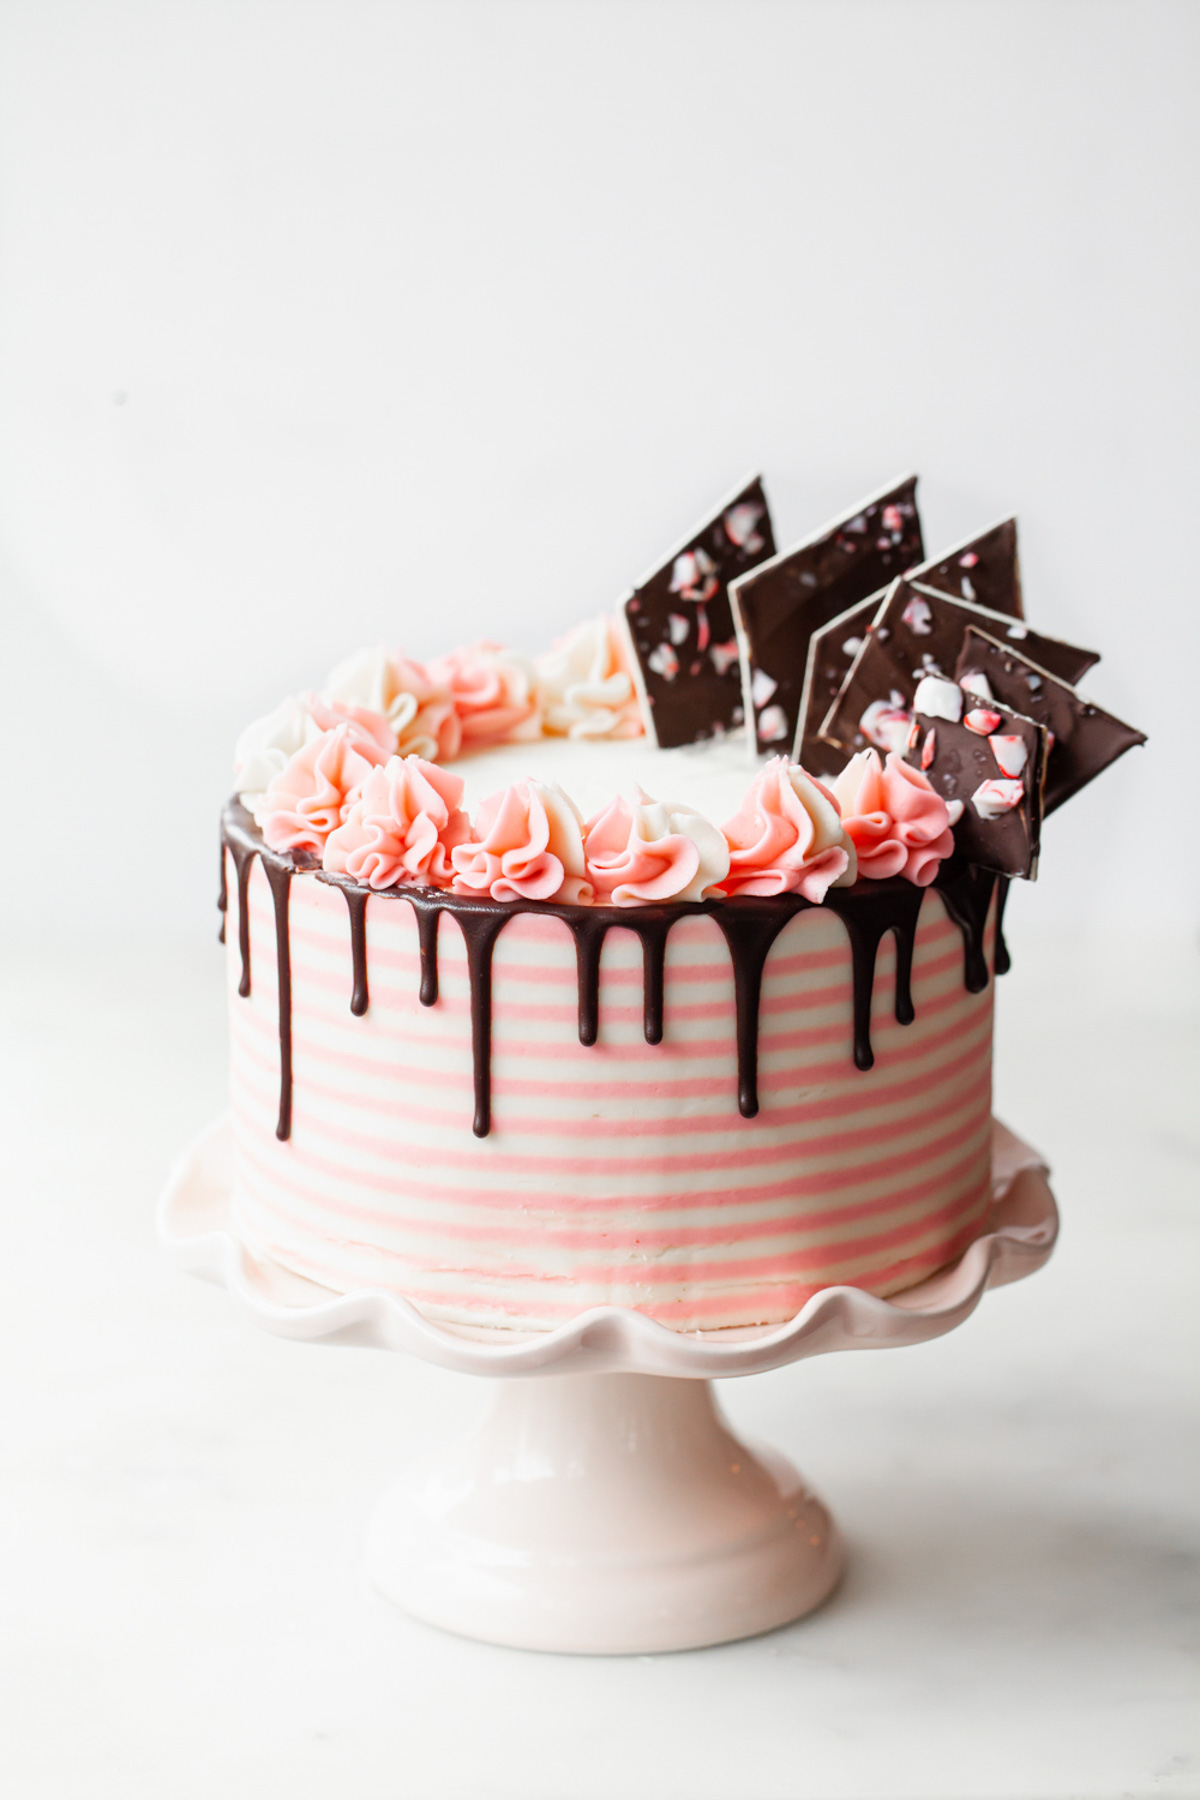 Chocolate peppermint cake with pink and white candy cane stripes with chocolate drip and peppermint bark on top